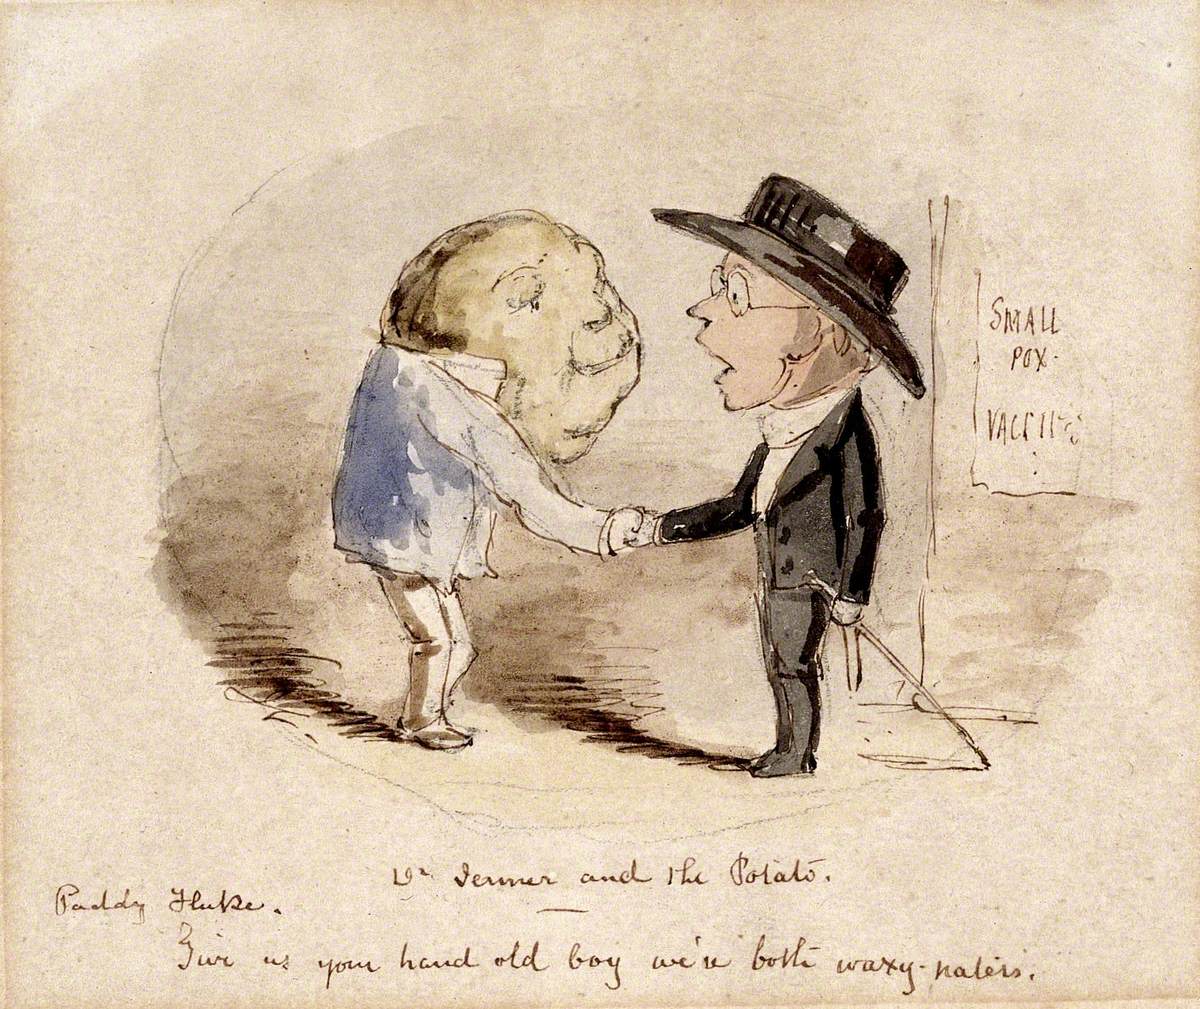 A Potato Shaking Hands with Edward Jenner, Claiming Him as a Fellow Vaccinator